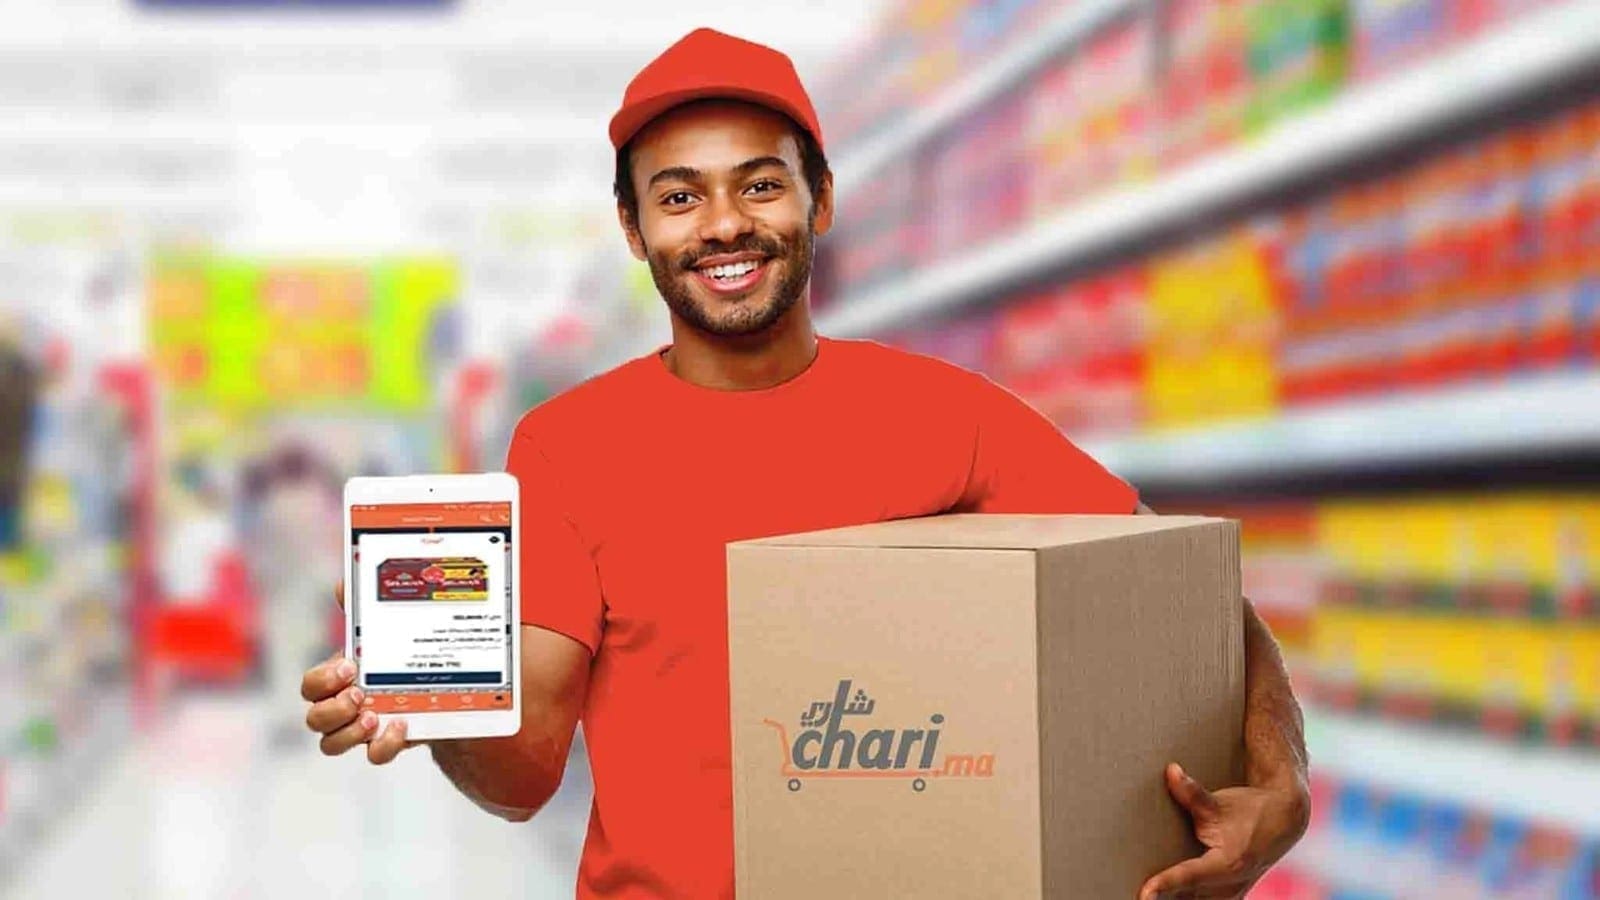 Moroccan retailtech startup Chari.ma raises US$5m to spearhead expansion plan